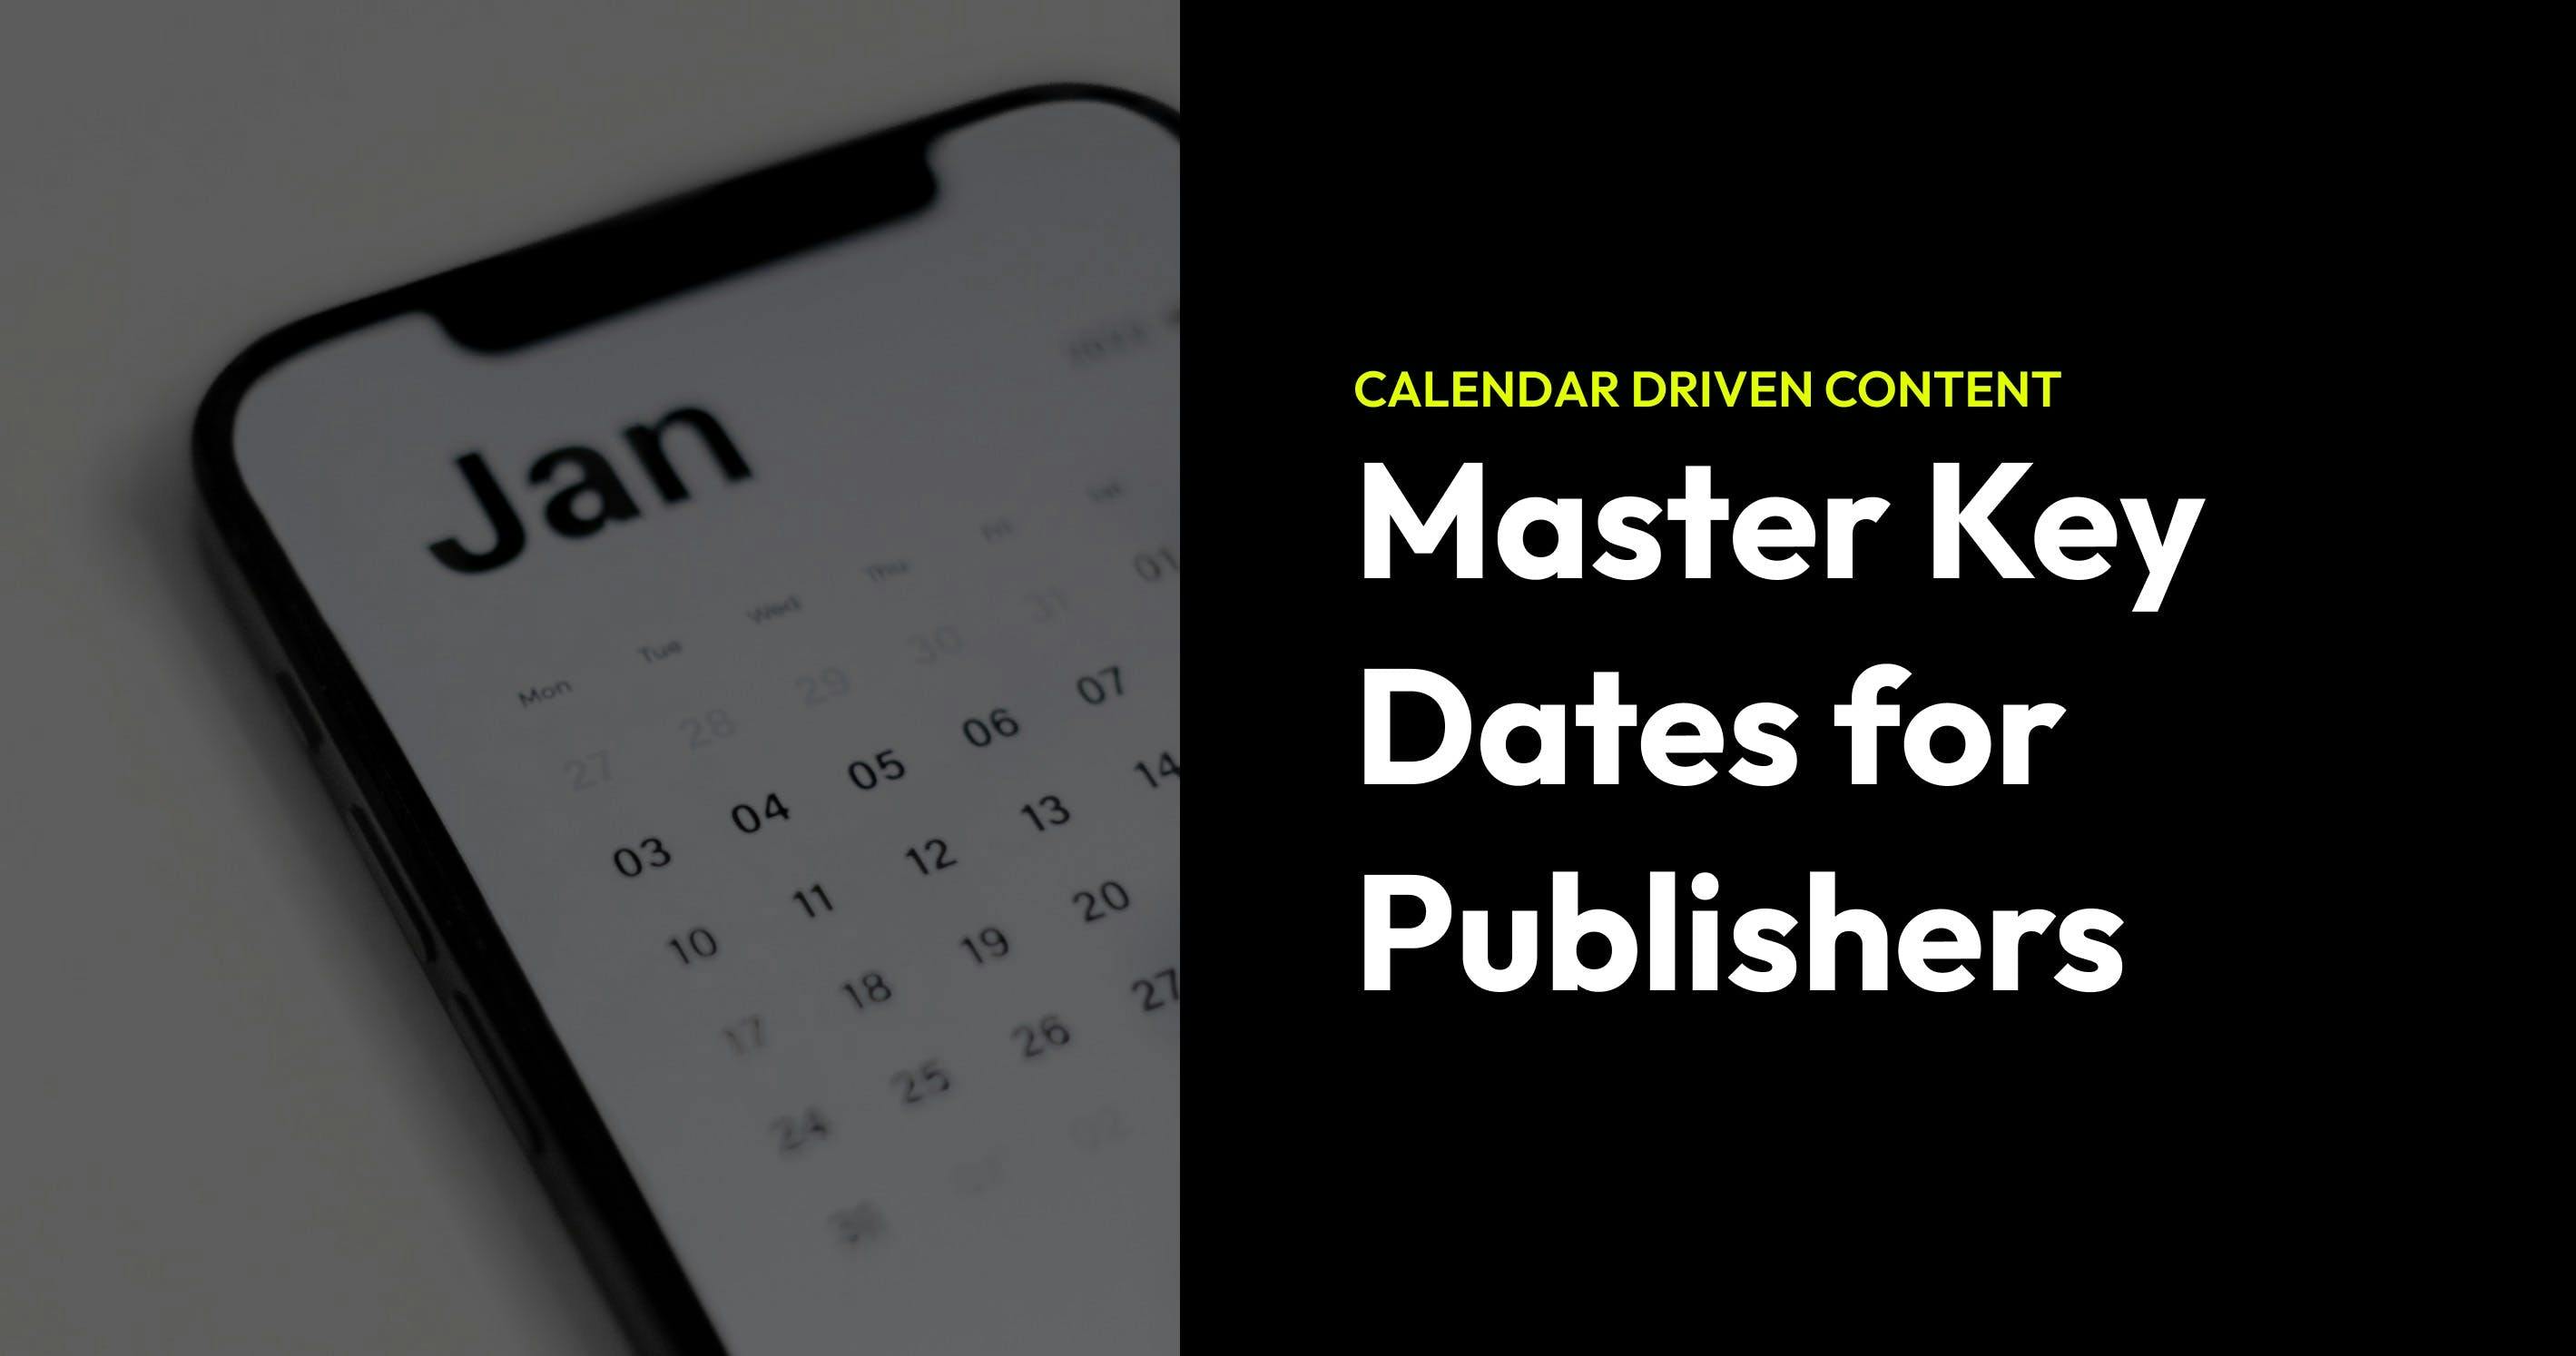 An image for a blog post titled Calendar Driven Content: Mastering Key Dates for Publishers